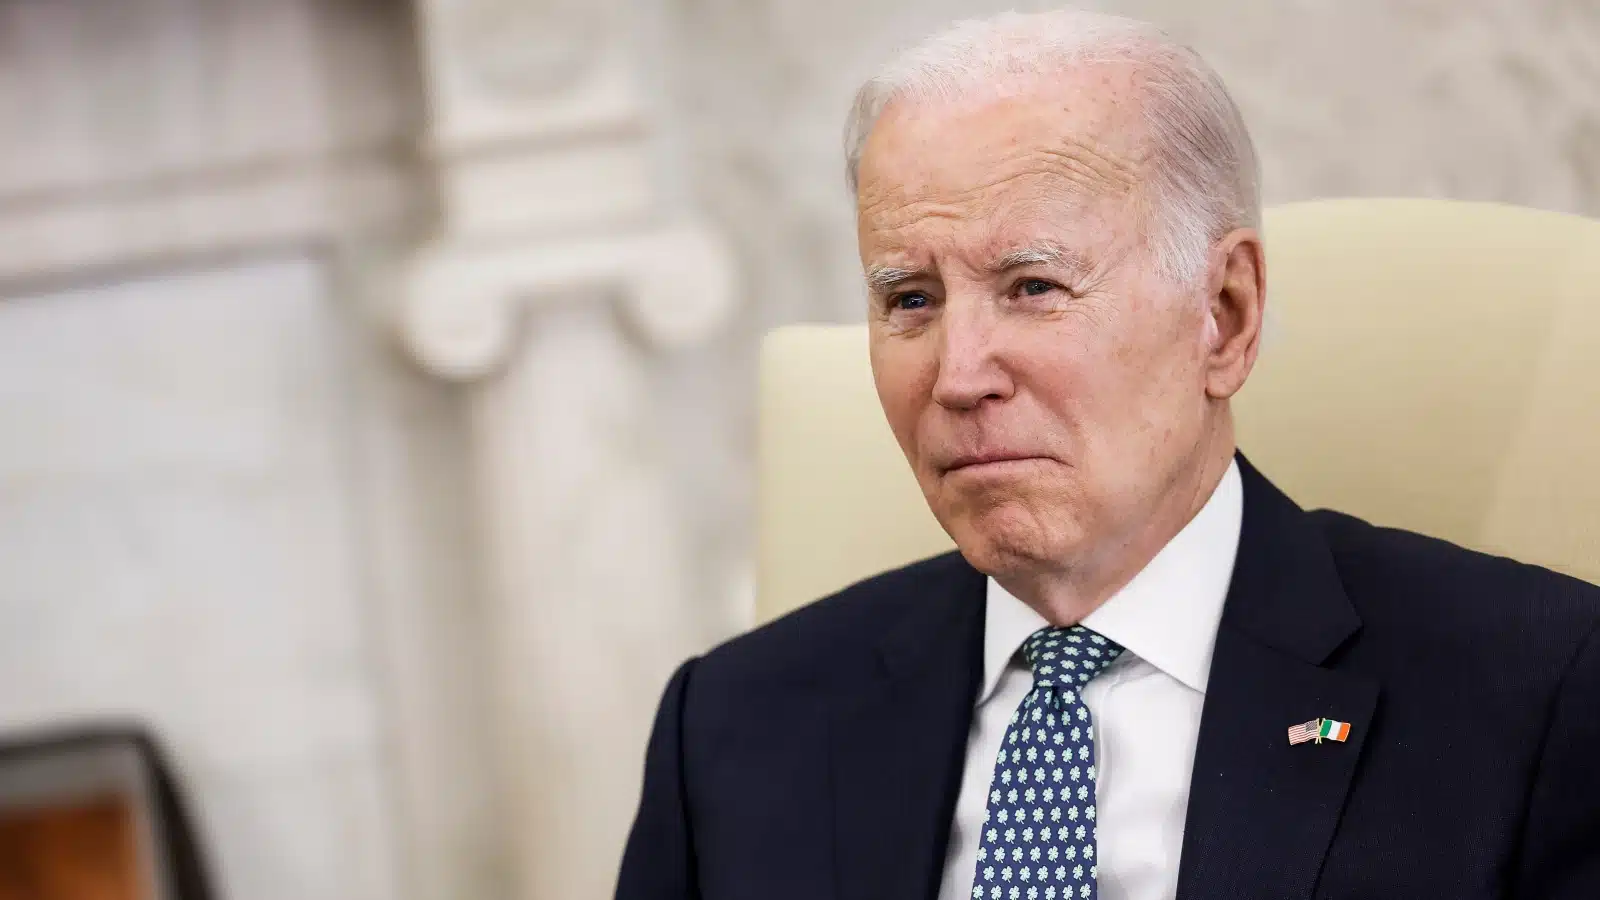 ‘TEXIT’: Bill to Make Texas Independent Makes Progress In Blow to Biden